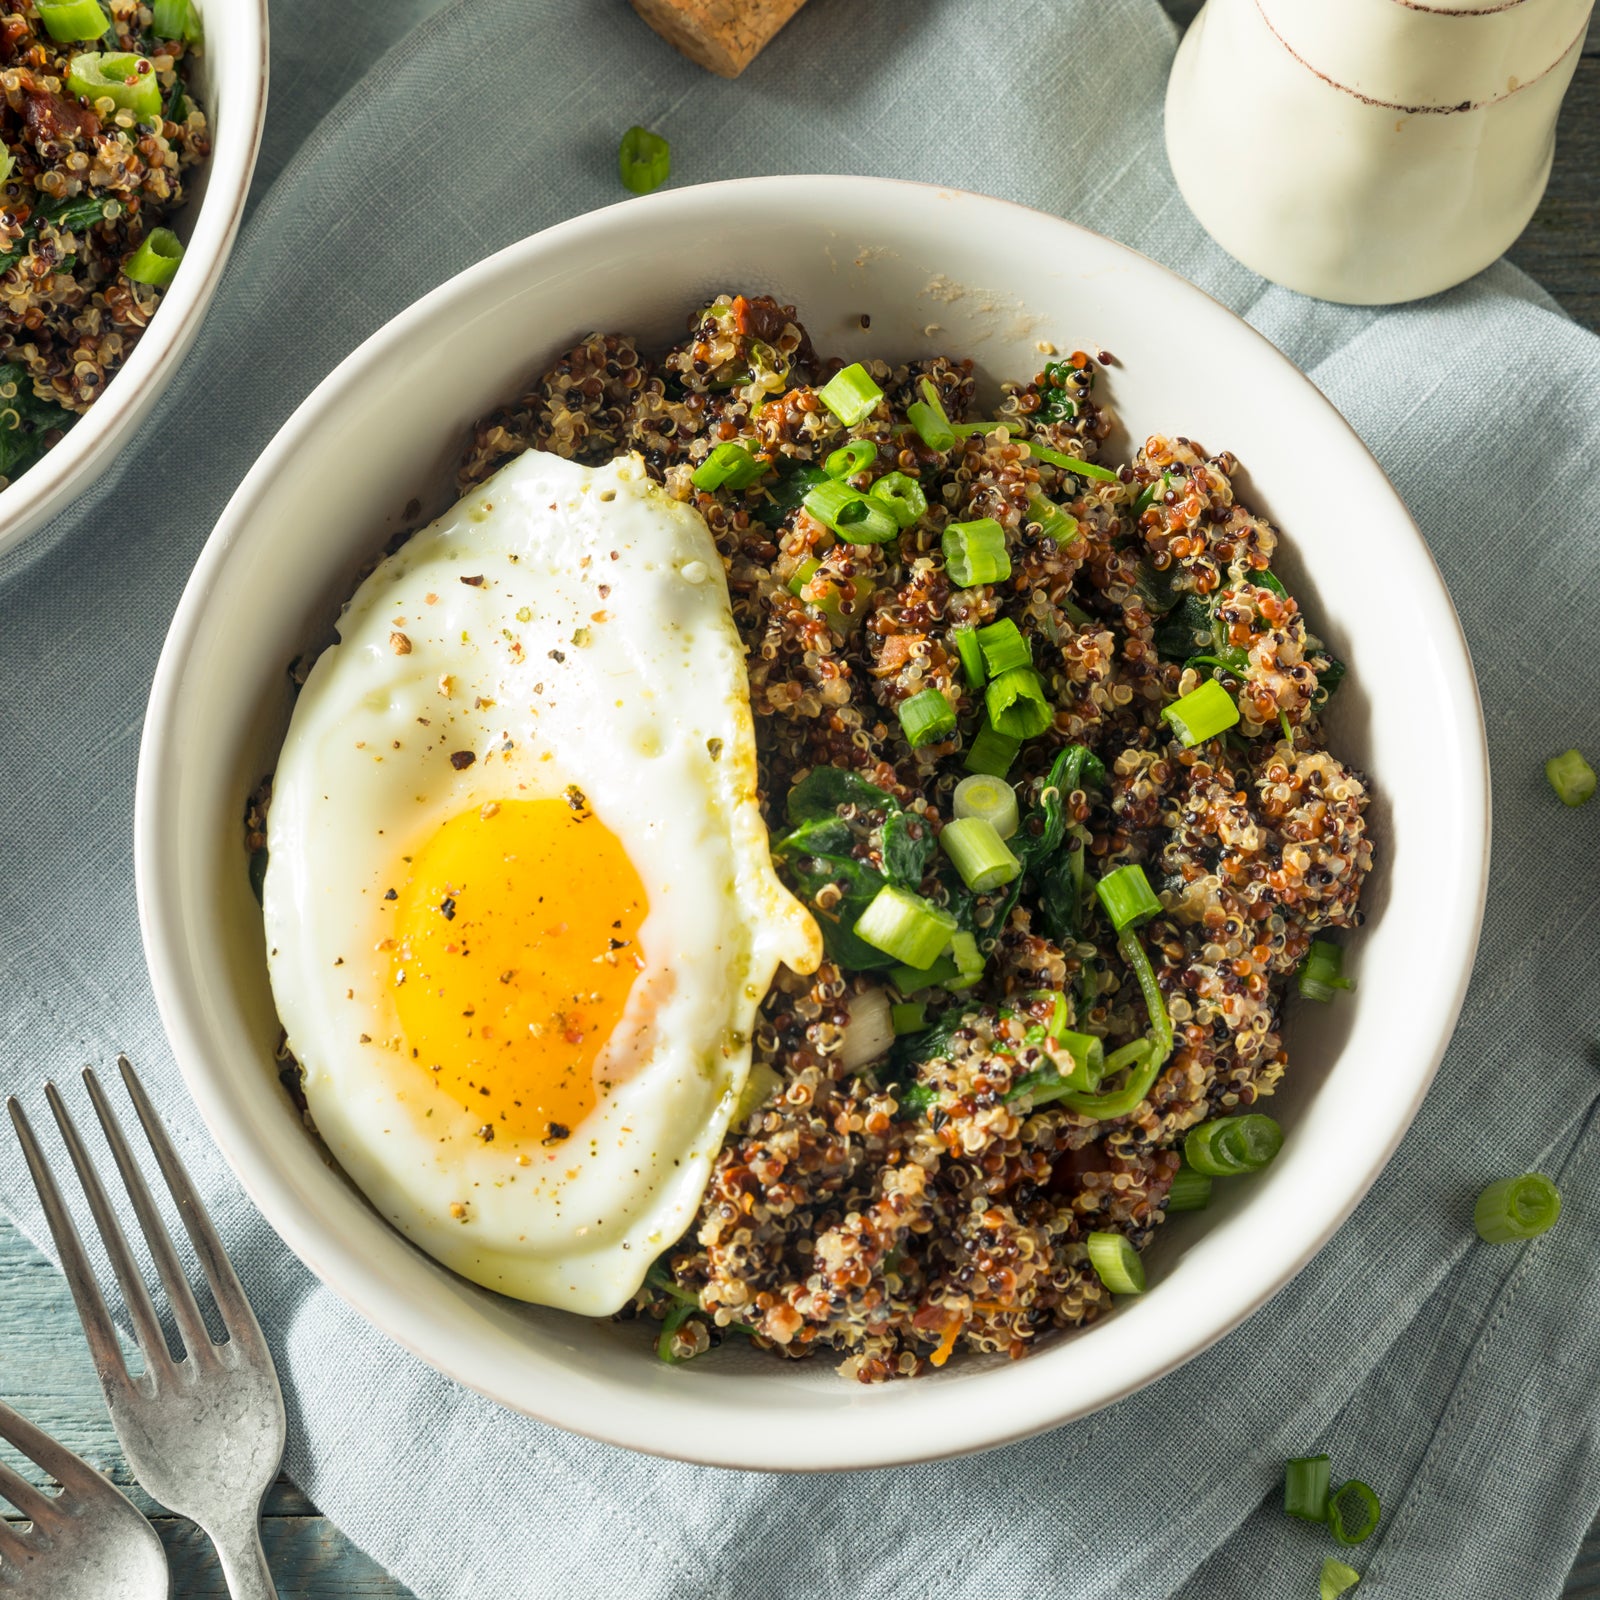 Hearty Breakfast Bowl with Egg Beaters - Eat Move Make